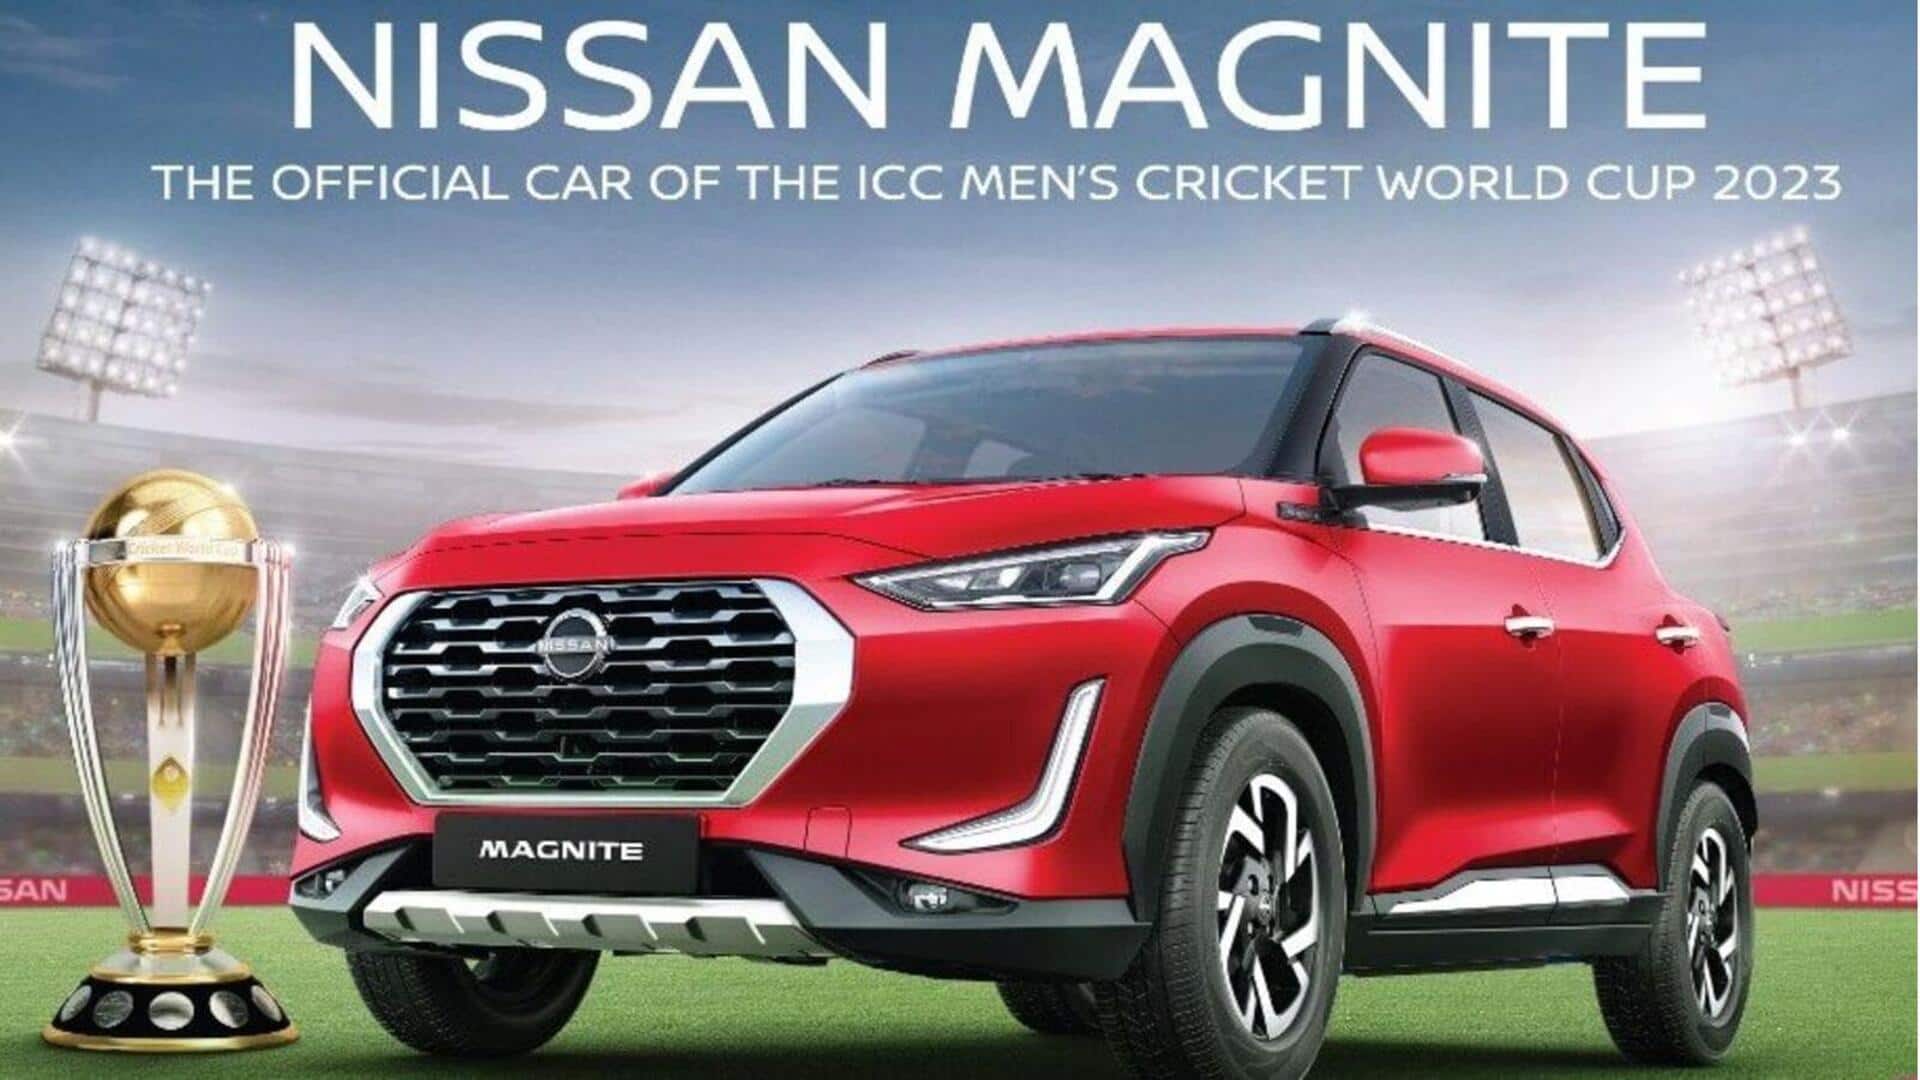 Nissan Magnite becomes official car of ICC Cricket World Cup